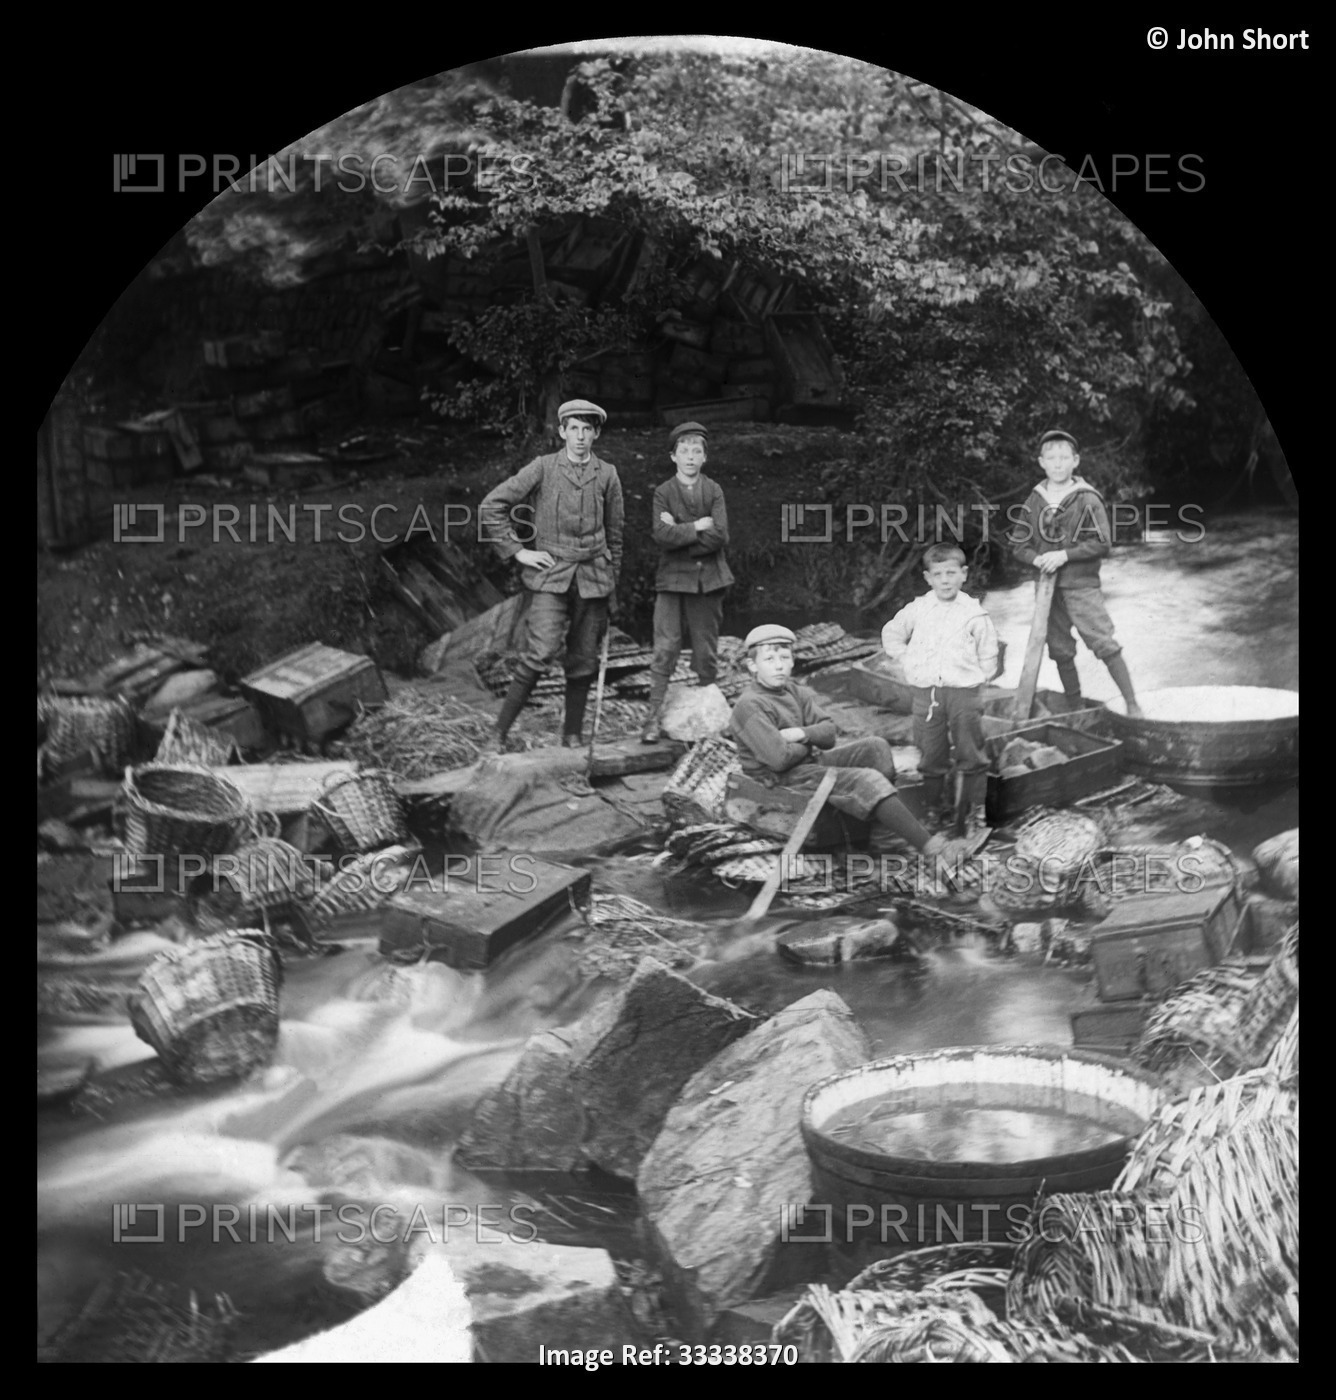 Children in a river with baskets and barrels